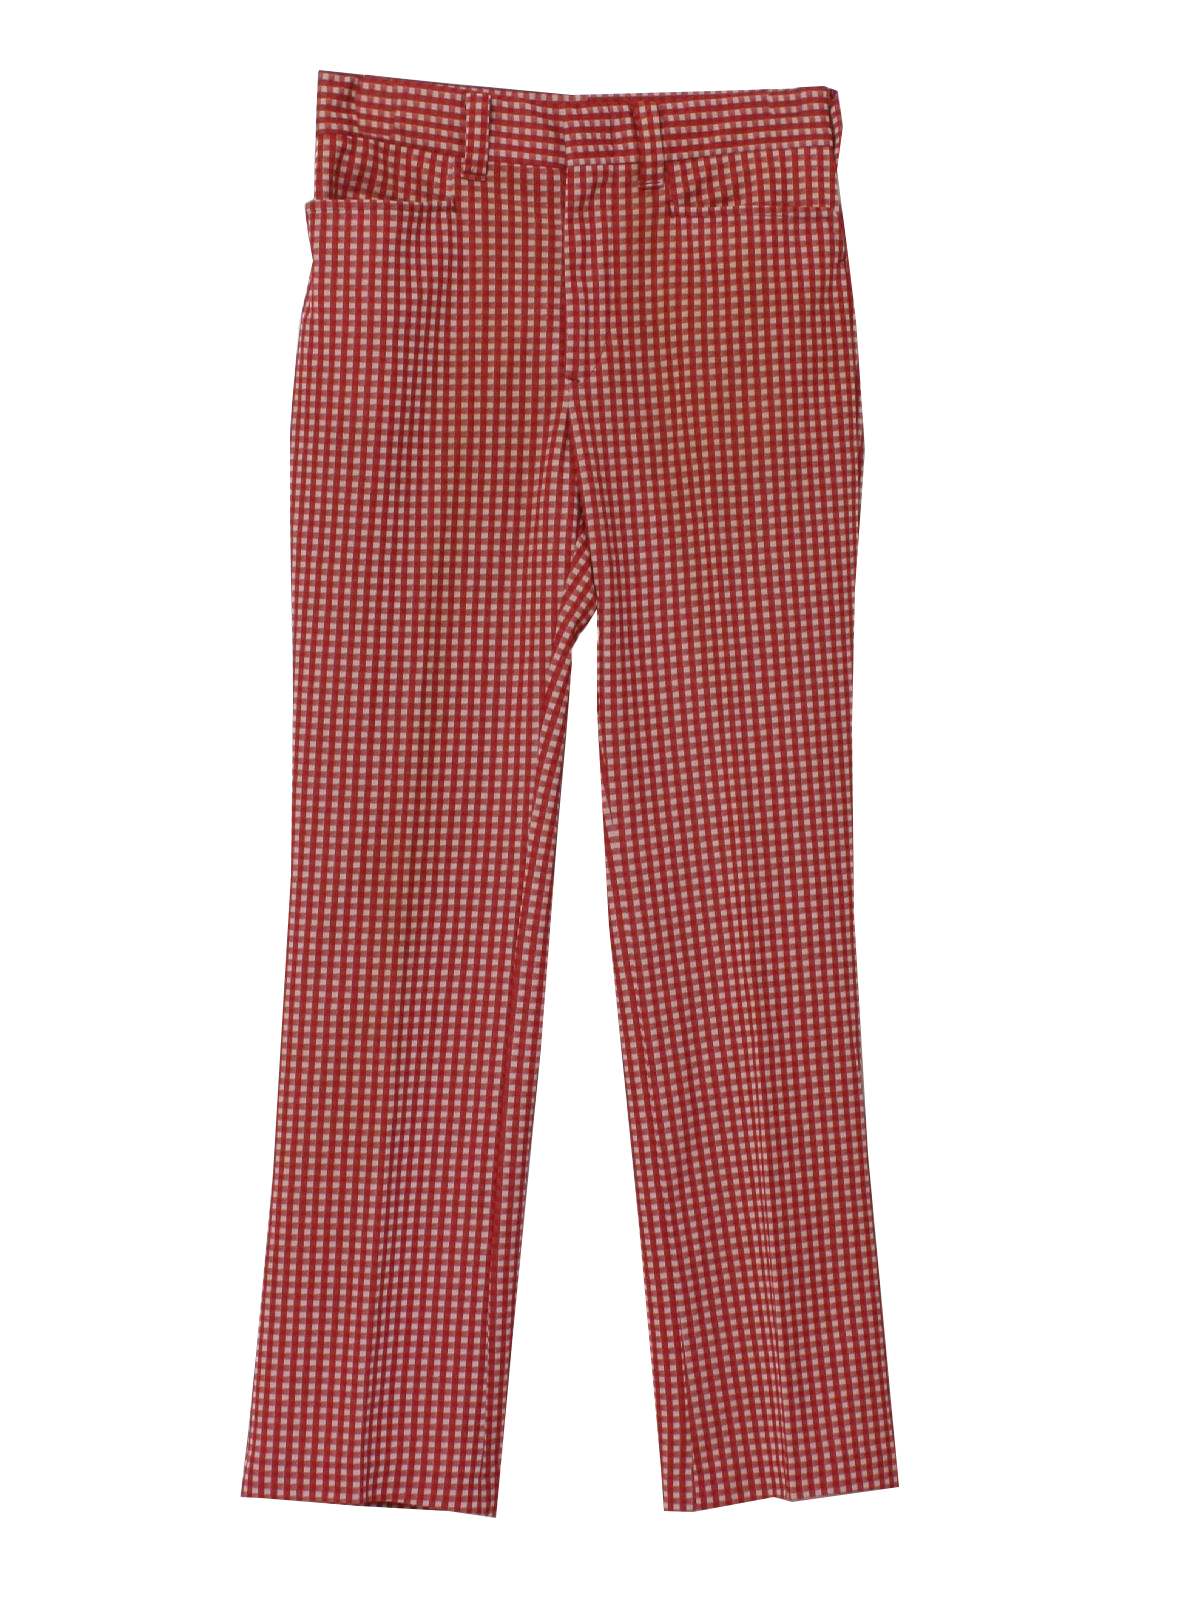 70s Retro Flared Pants / Flares: 70s -Care Label- Mens red and off ...